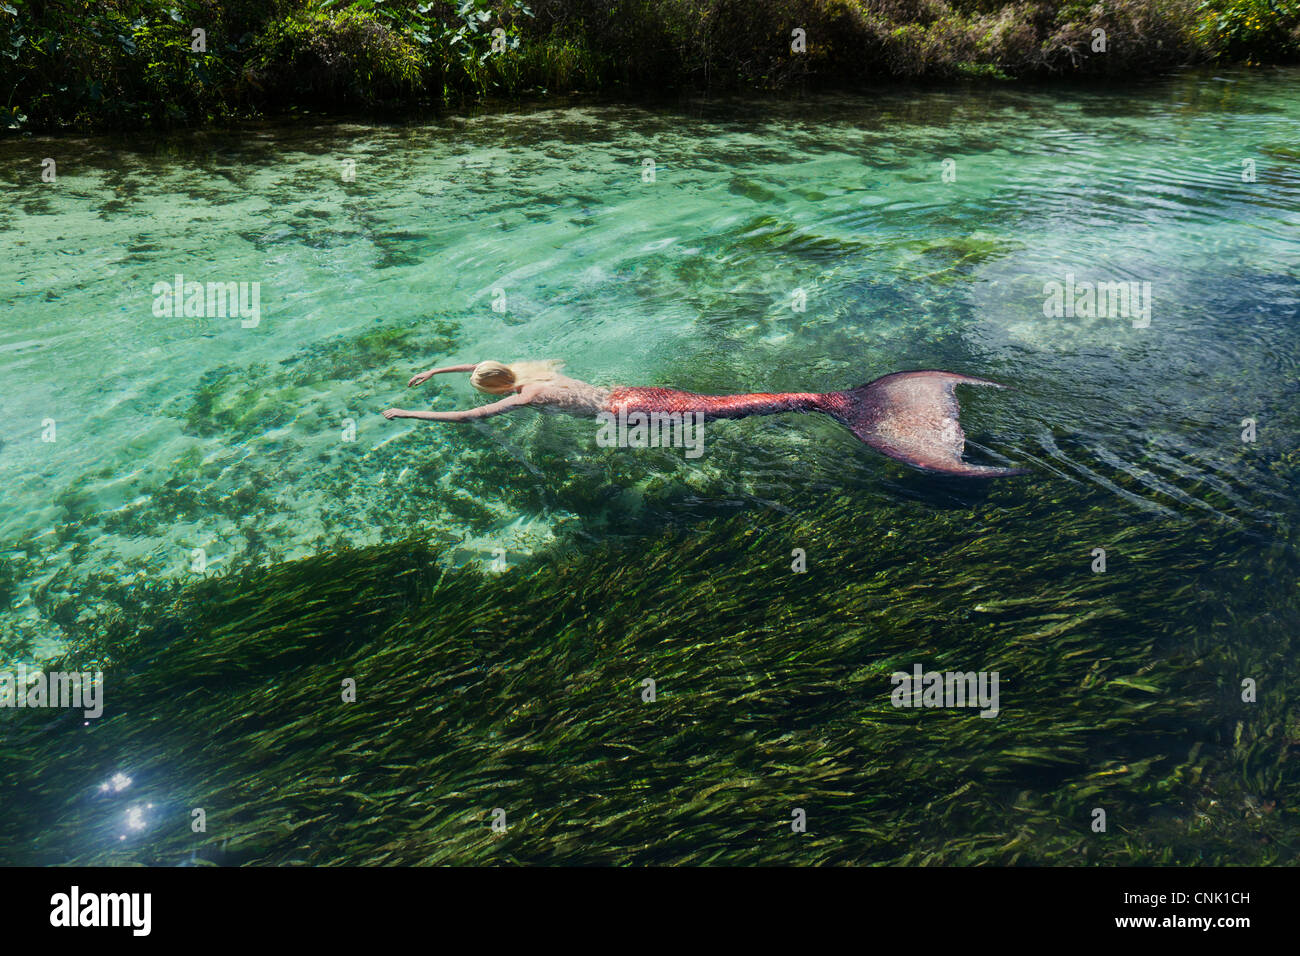 Mermaid floating on her stomach above eel grass in a Wachee river in Weeki Wachee Springs Florida Stock Photo